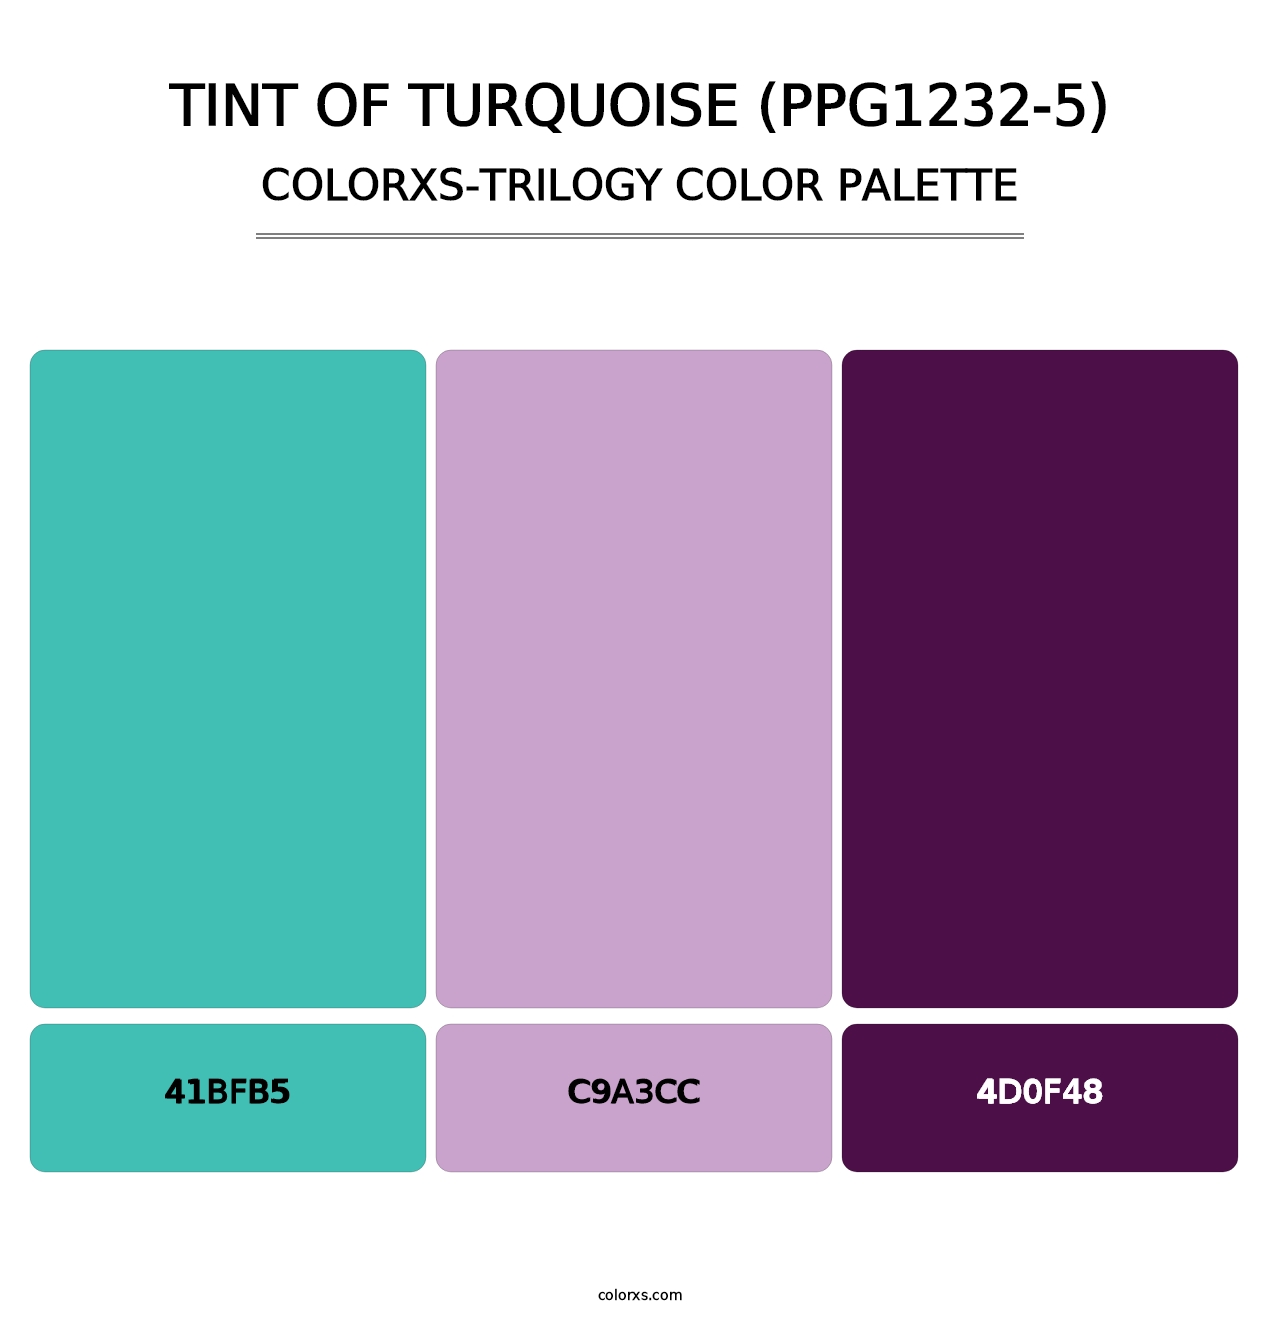 Tint Of Turquoise (PPG1232-5) - Colorxs Trilogy Palette